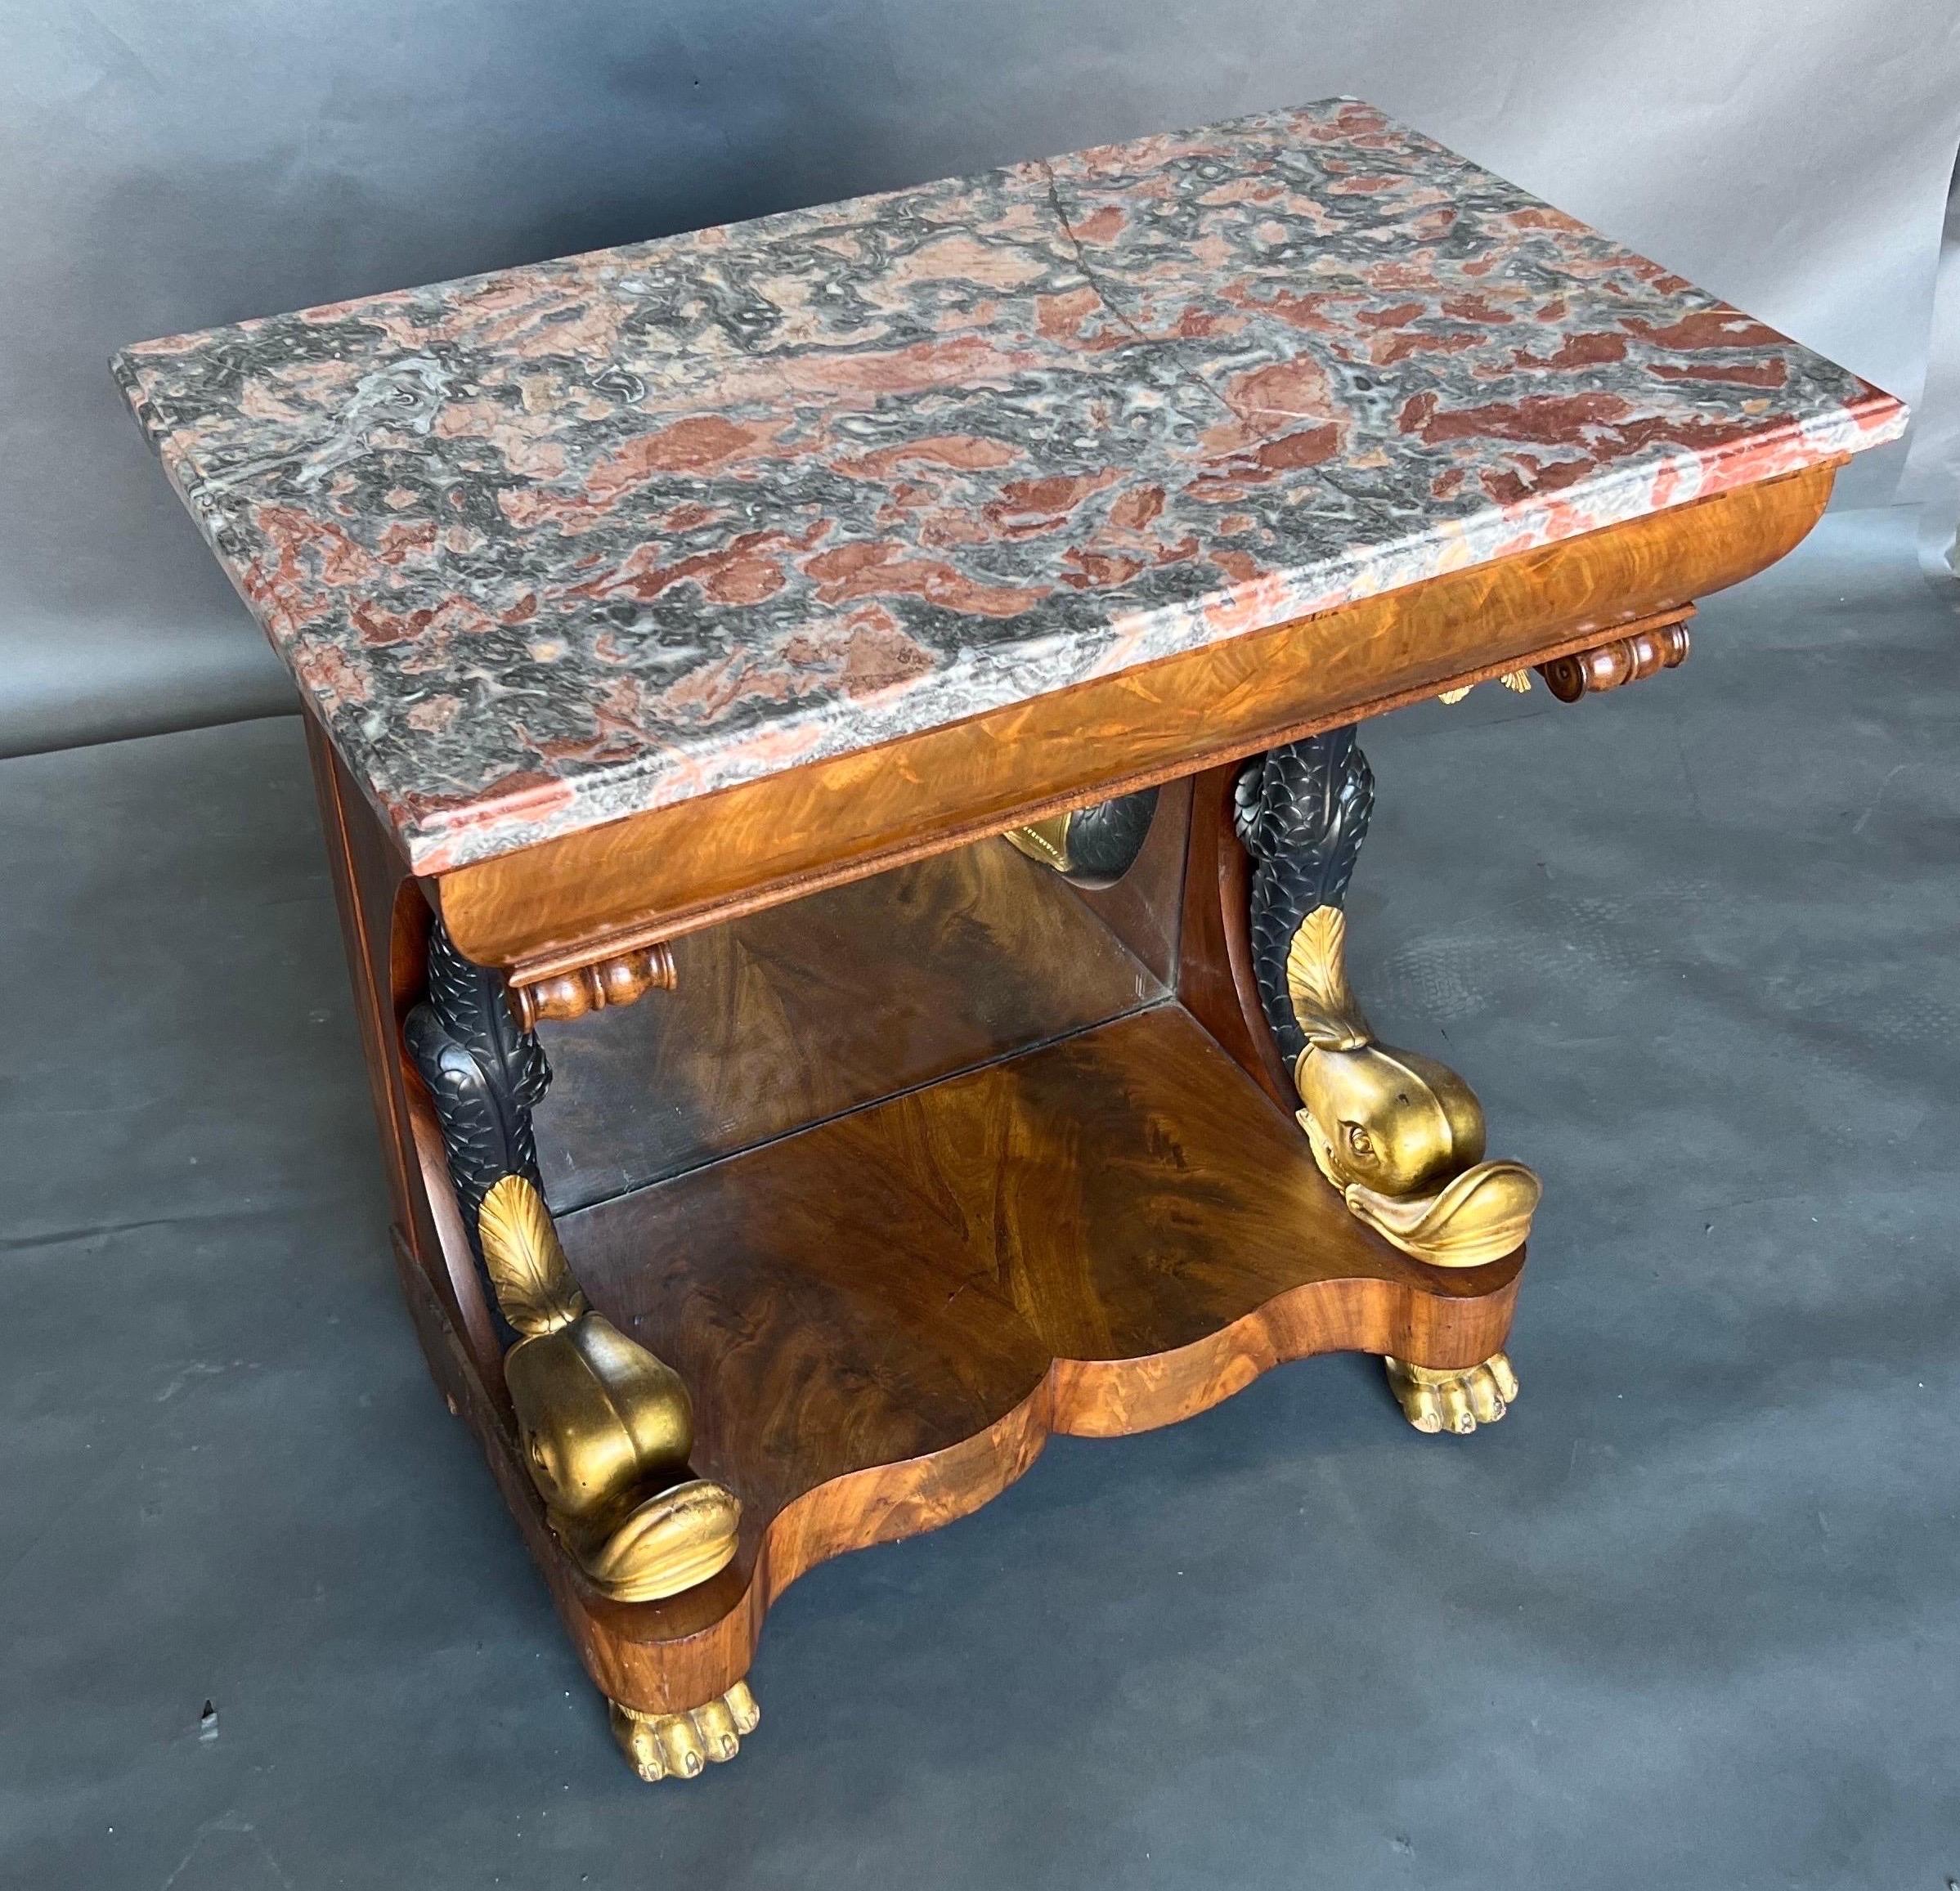 Handsome little Neoclassical Swedish or French Single Drawer Console Table with Gilt dophins, mirrored back, marble top resting on gilt paw feet. On the bottom of the drawer there is a label from where it was sold at 